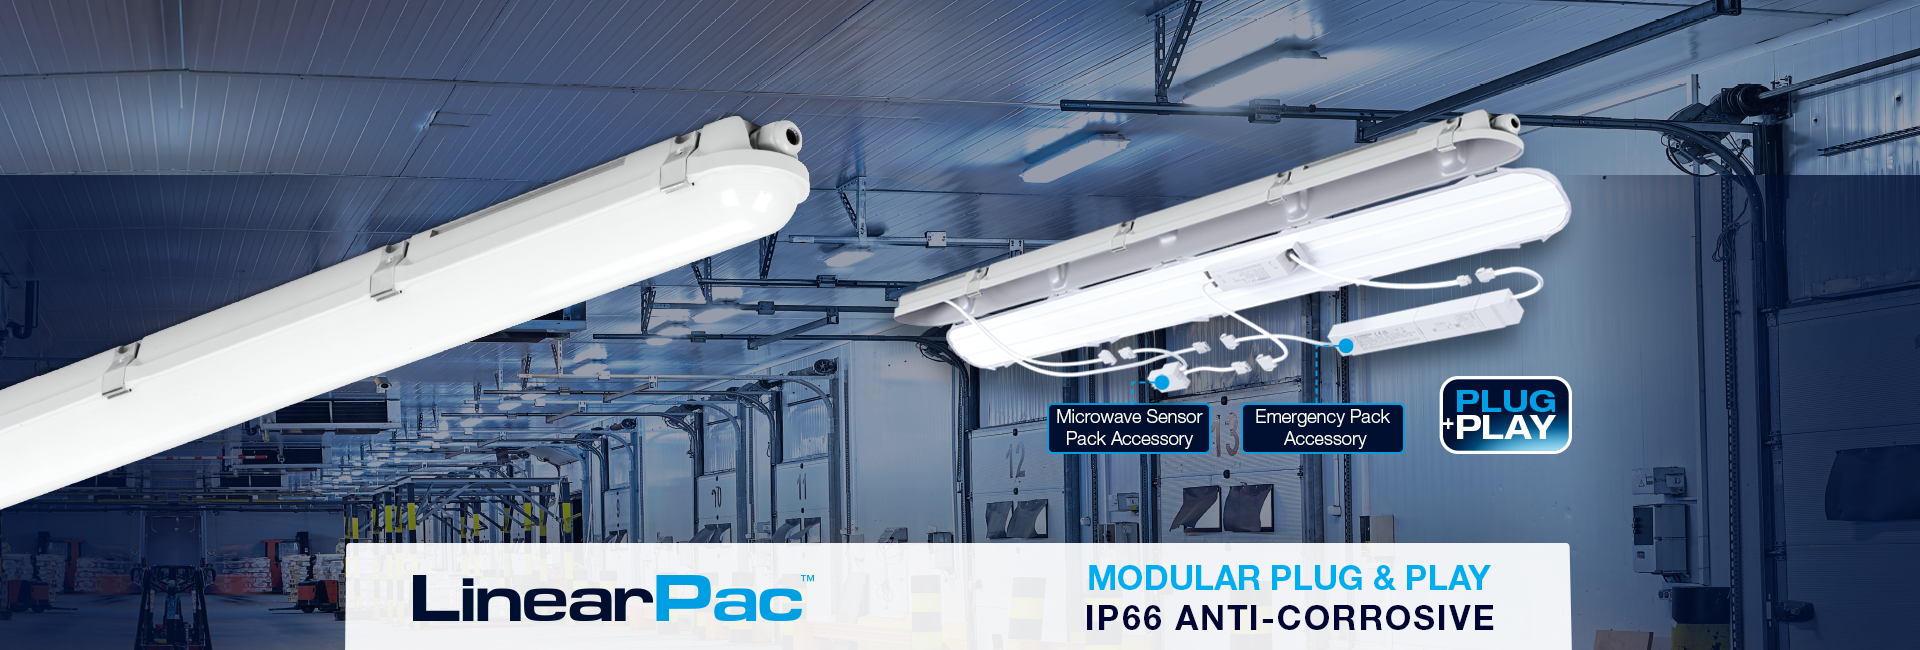 Show products in category What are the benefits of modular plug and play luminaires